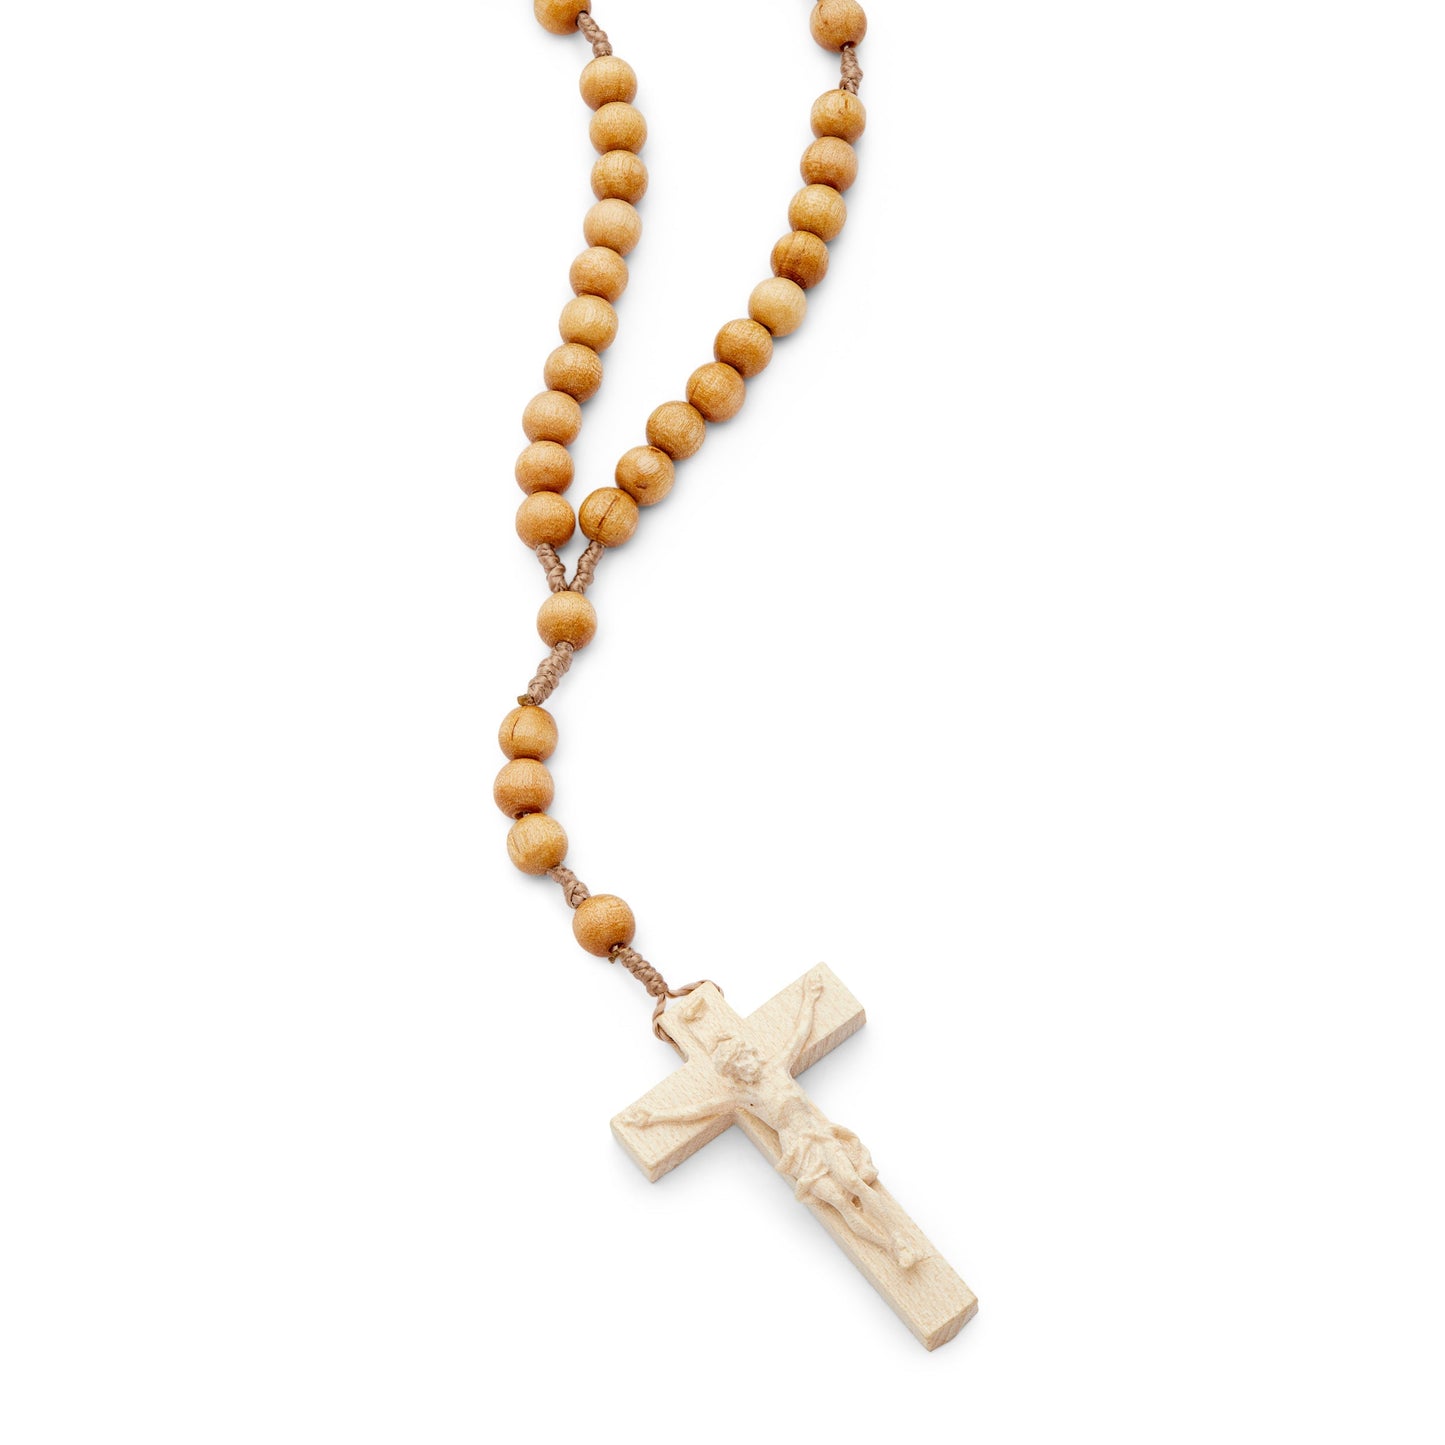 MONDO CATTOLICO Prayer Beads 35 cm (13.77 in) / 7 mm (0.27 in) Olive Wood Rosary